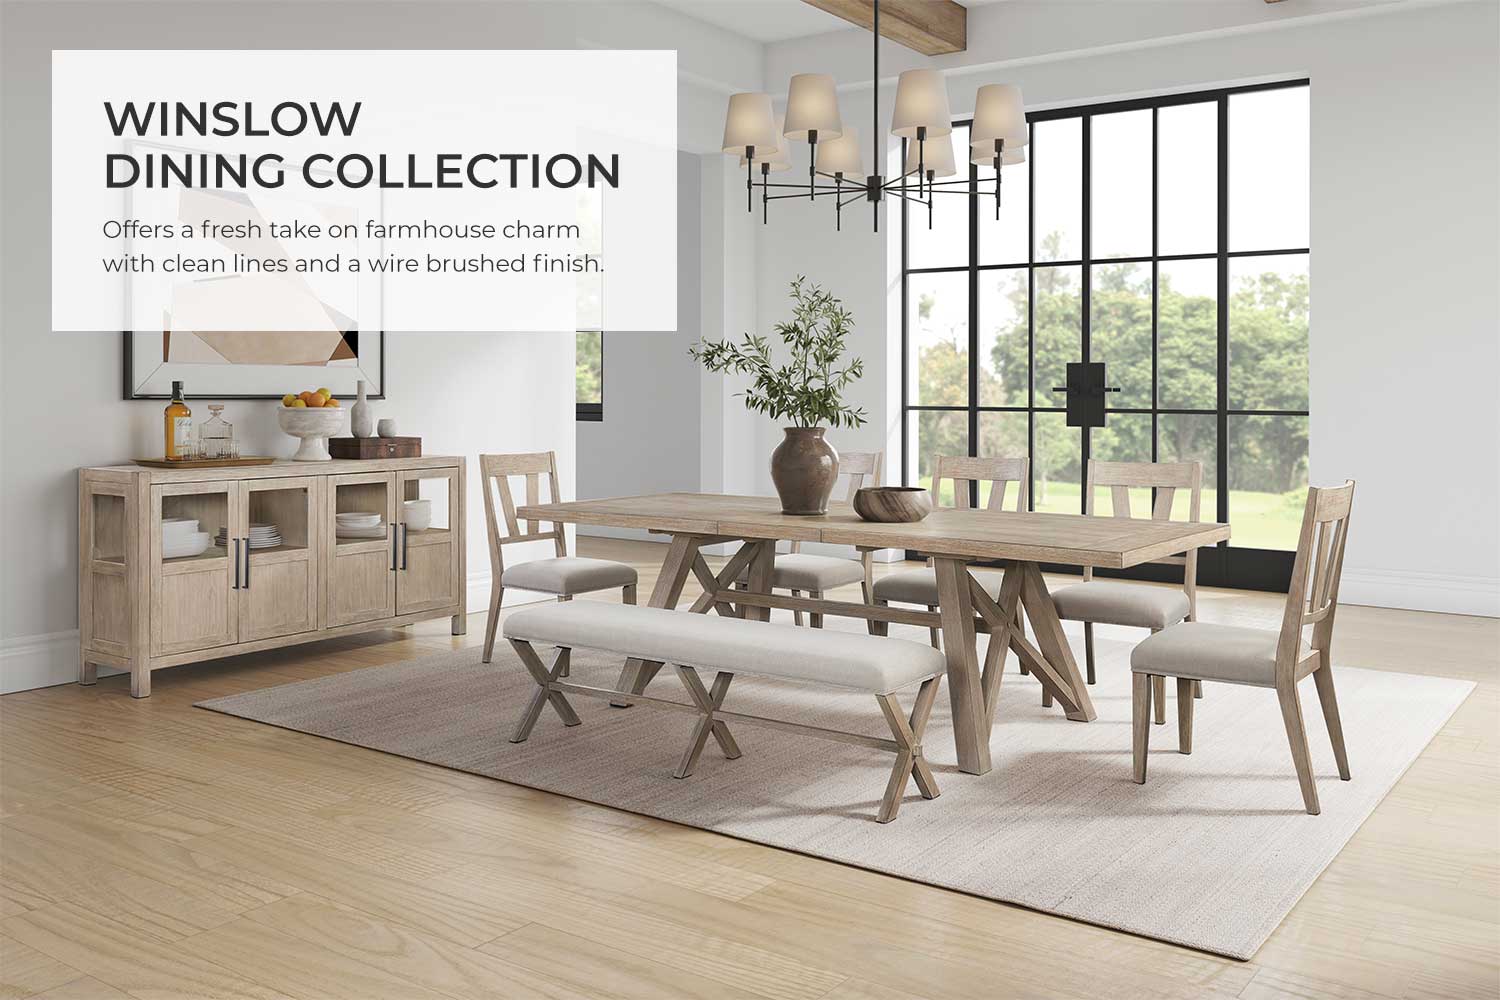 Winslow Dining Collection